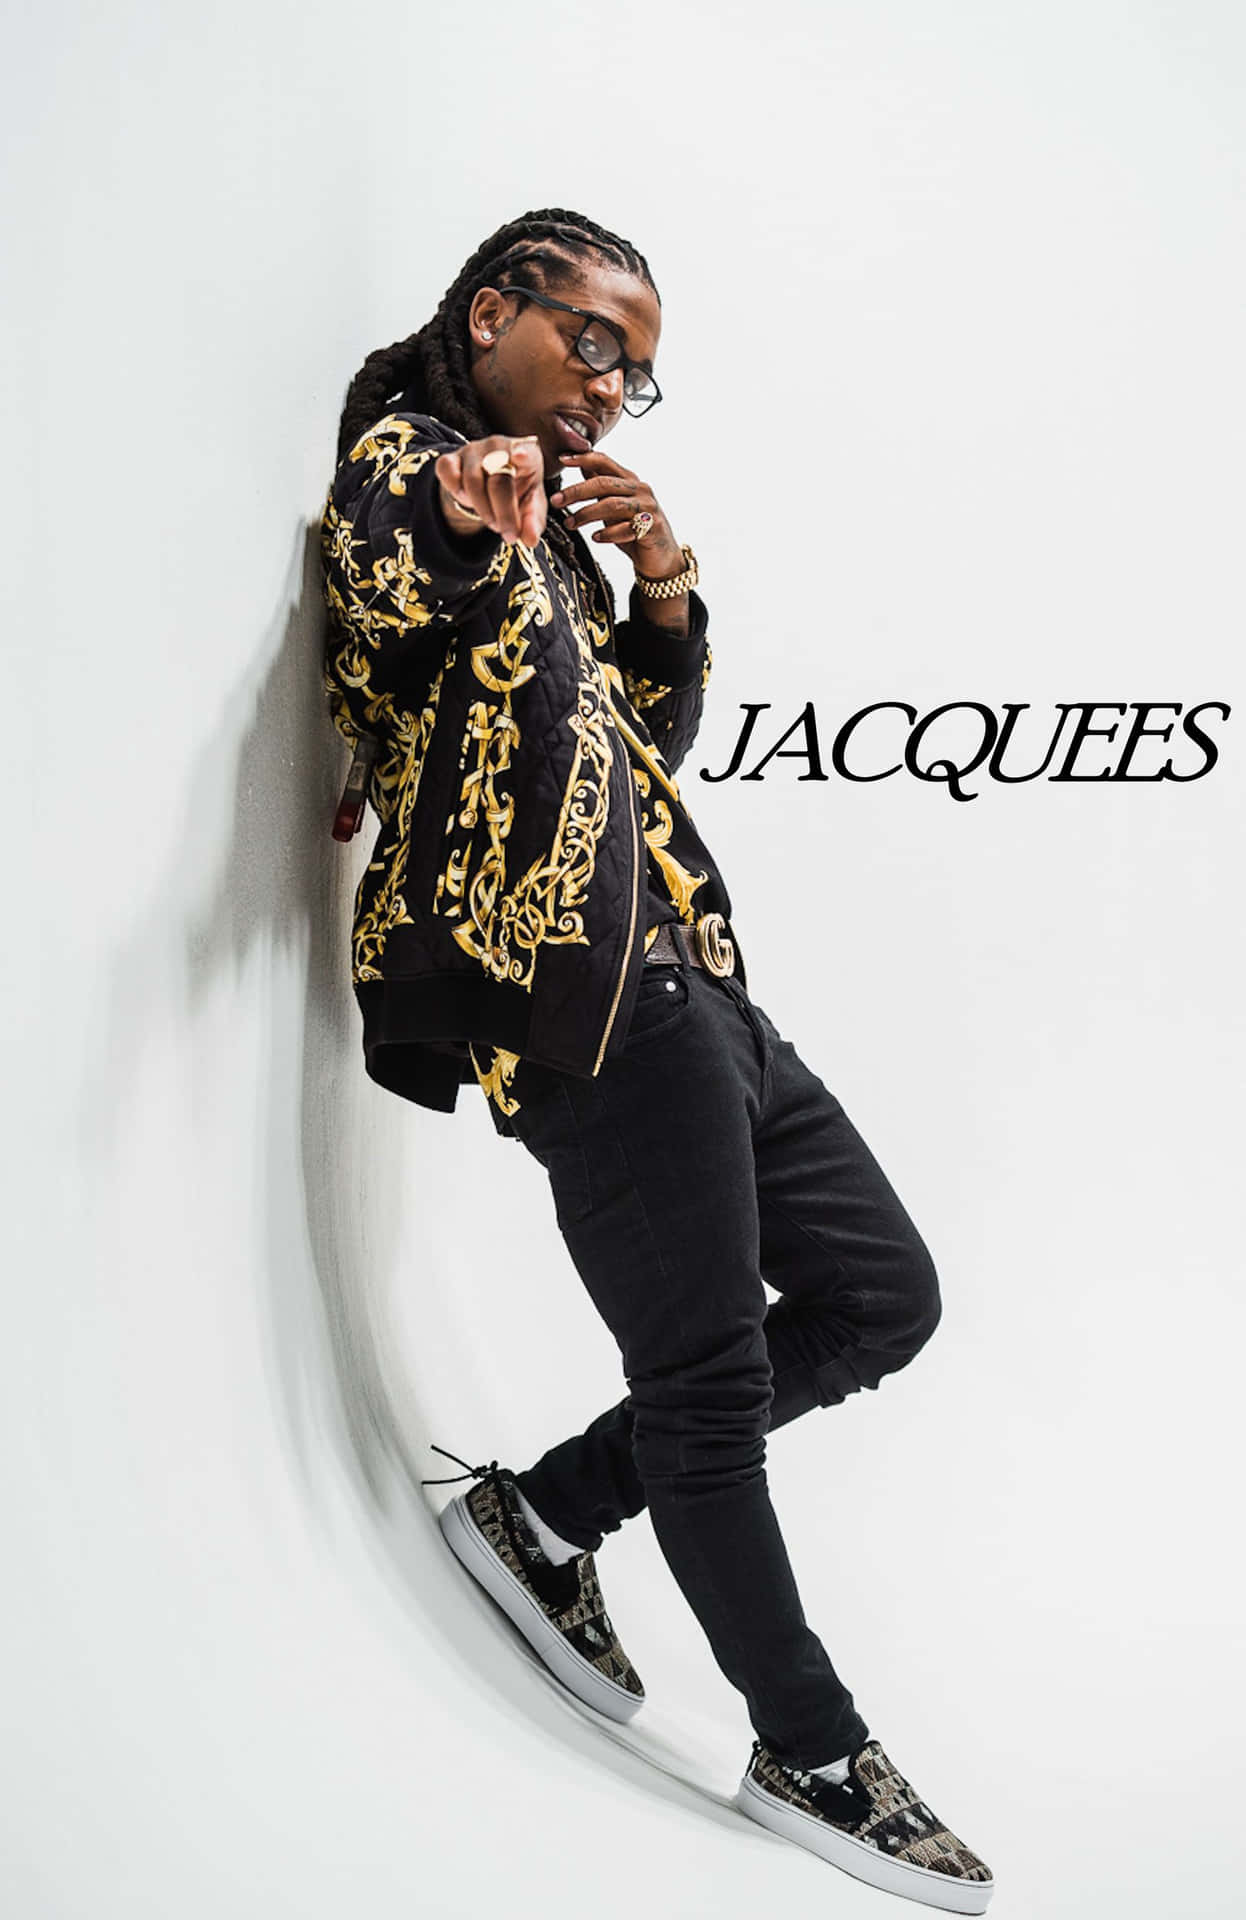 Jacquees Whole Body Photoshoot Wallpaper